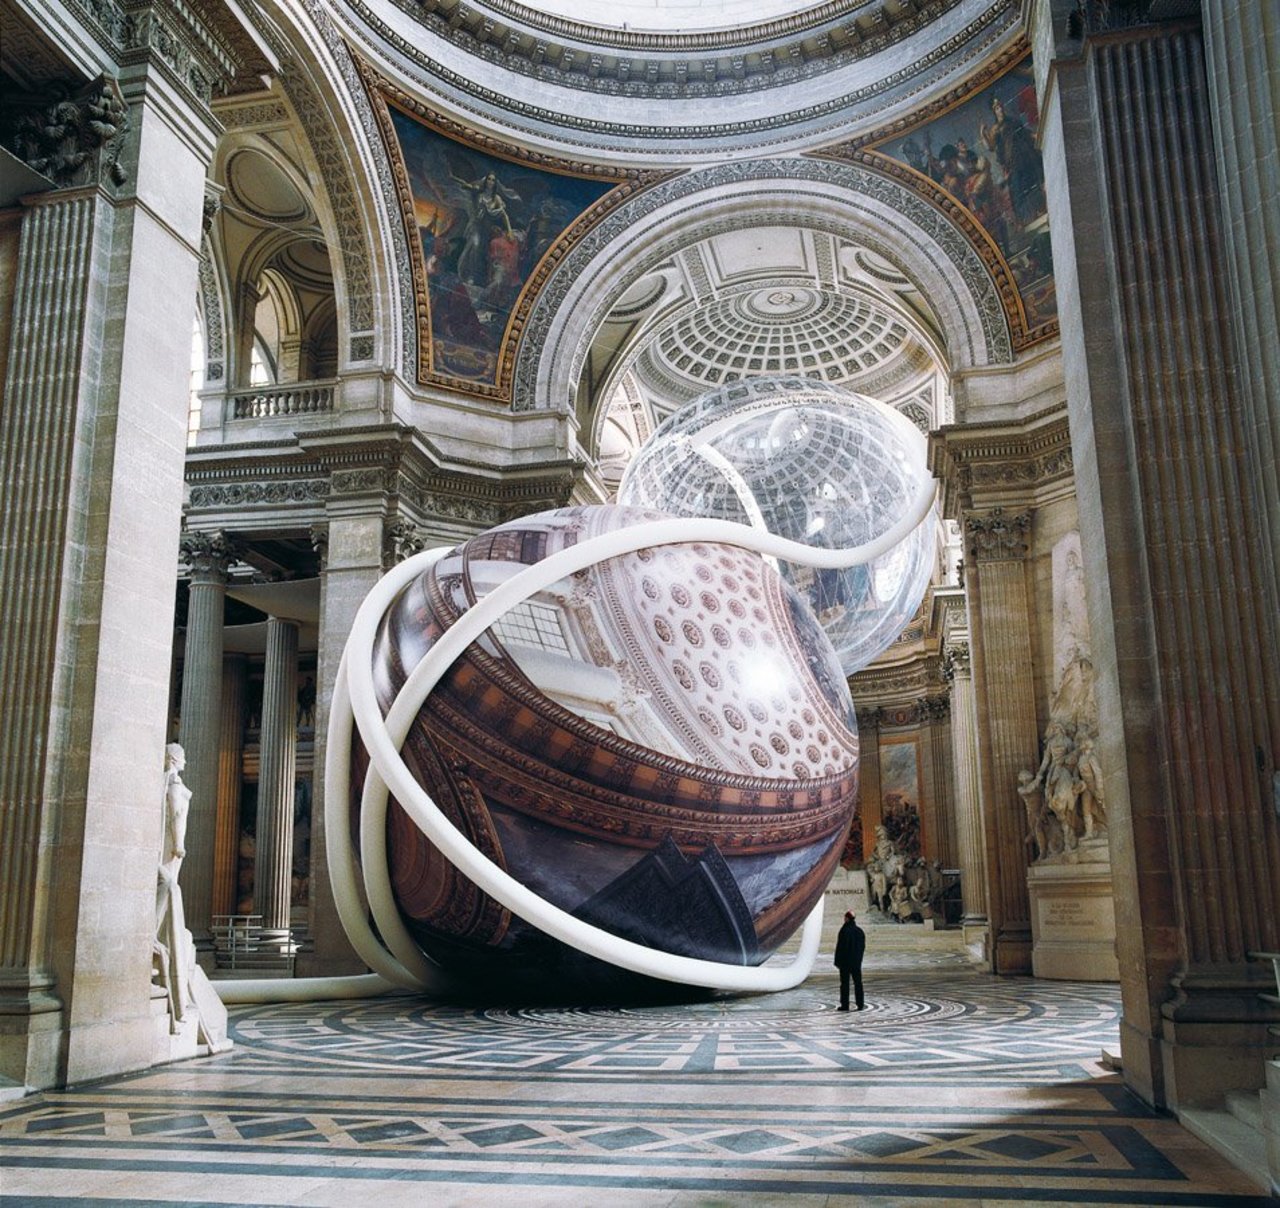 Austrian artist #KlausPinter explores the potential of the space around us with his floating installations. Enjoy a #TBT to his 2002 artwork, “Rebounds”, where the artist rolled two huge spheres into the Paris Panthéon .  #Installation #ContemporaryArt #Art https://t.co/wye4pgygGN